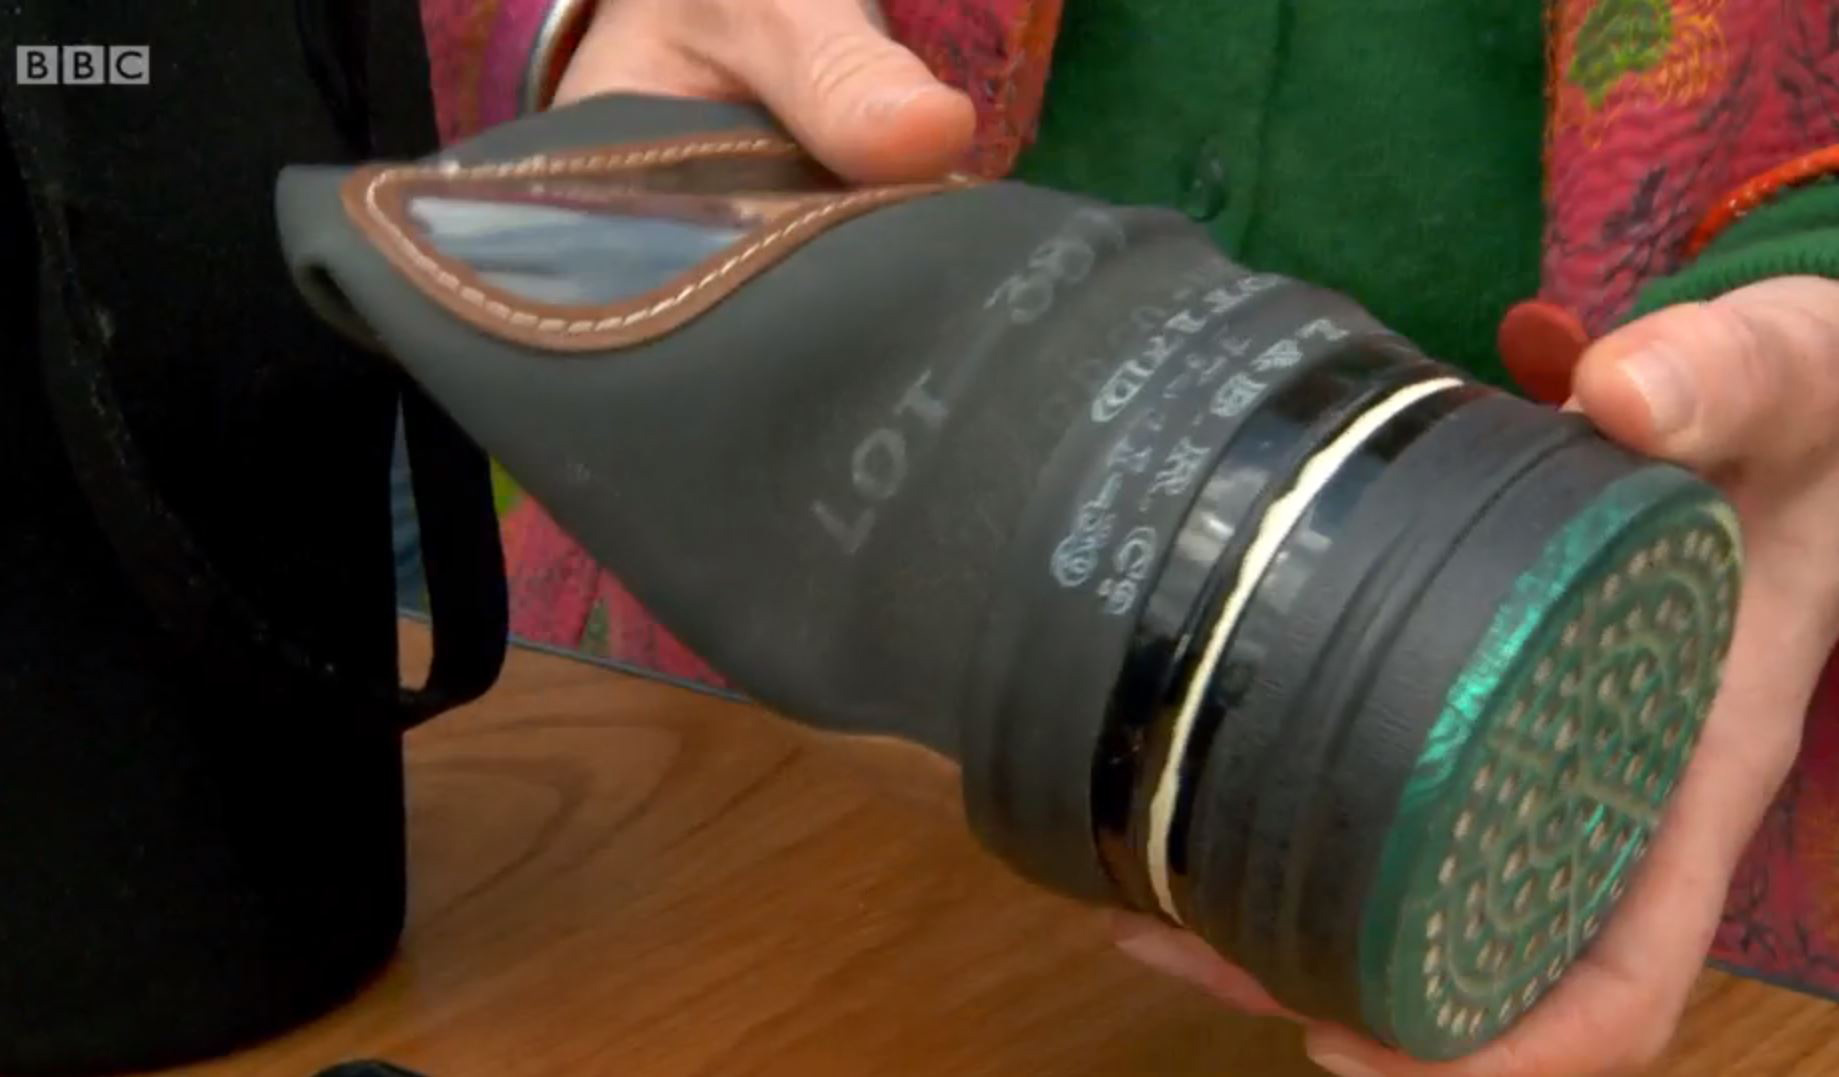 Antiques Roadshow has been blasted by health watchdogs after it highlighted a dangerous World War Two gas mask containing cancer-causing asbestos (BBC)